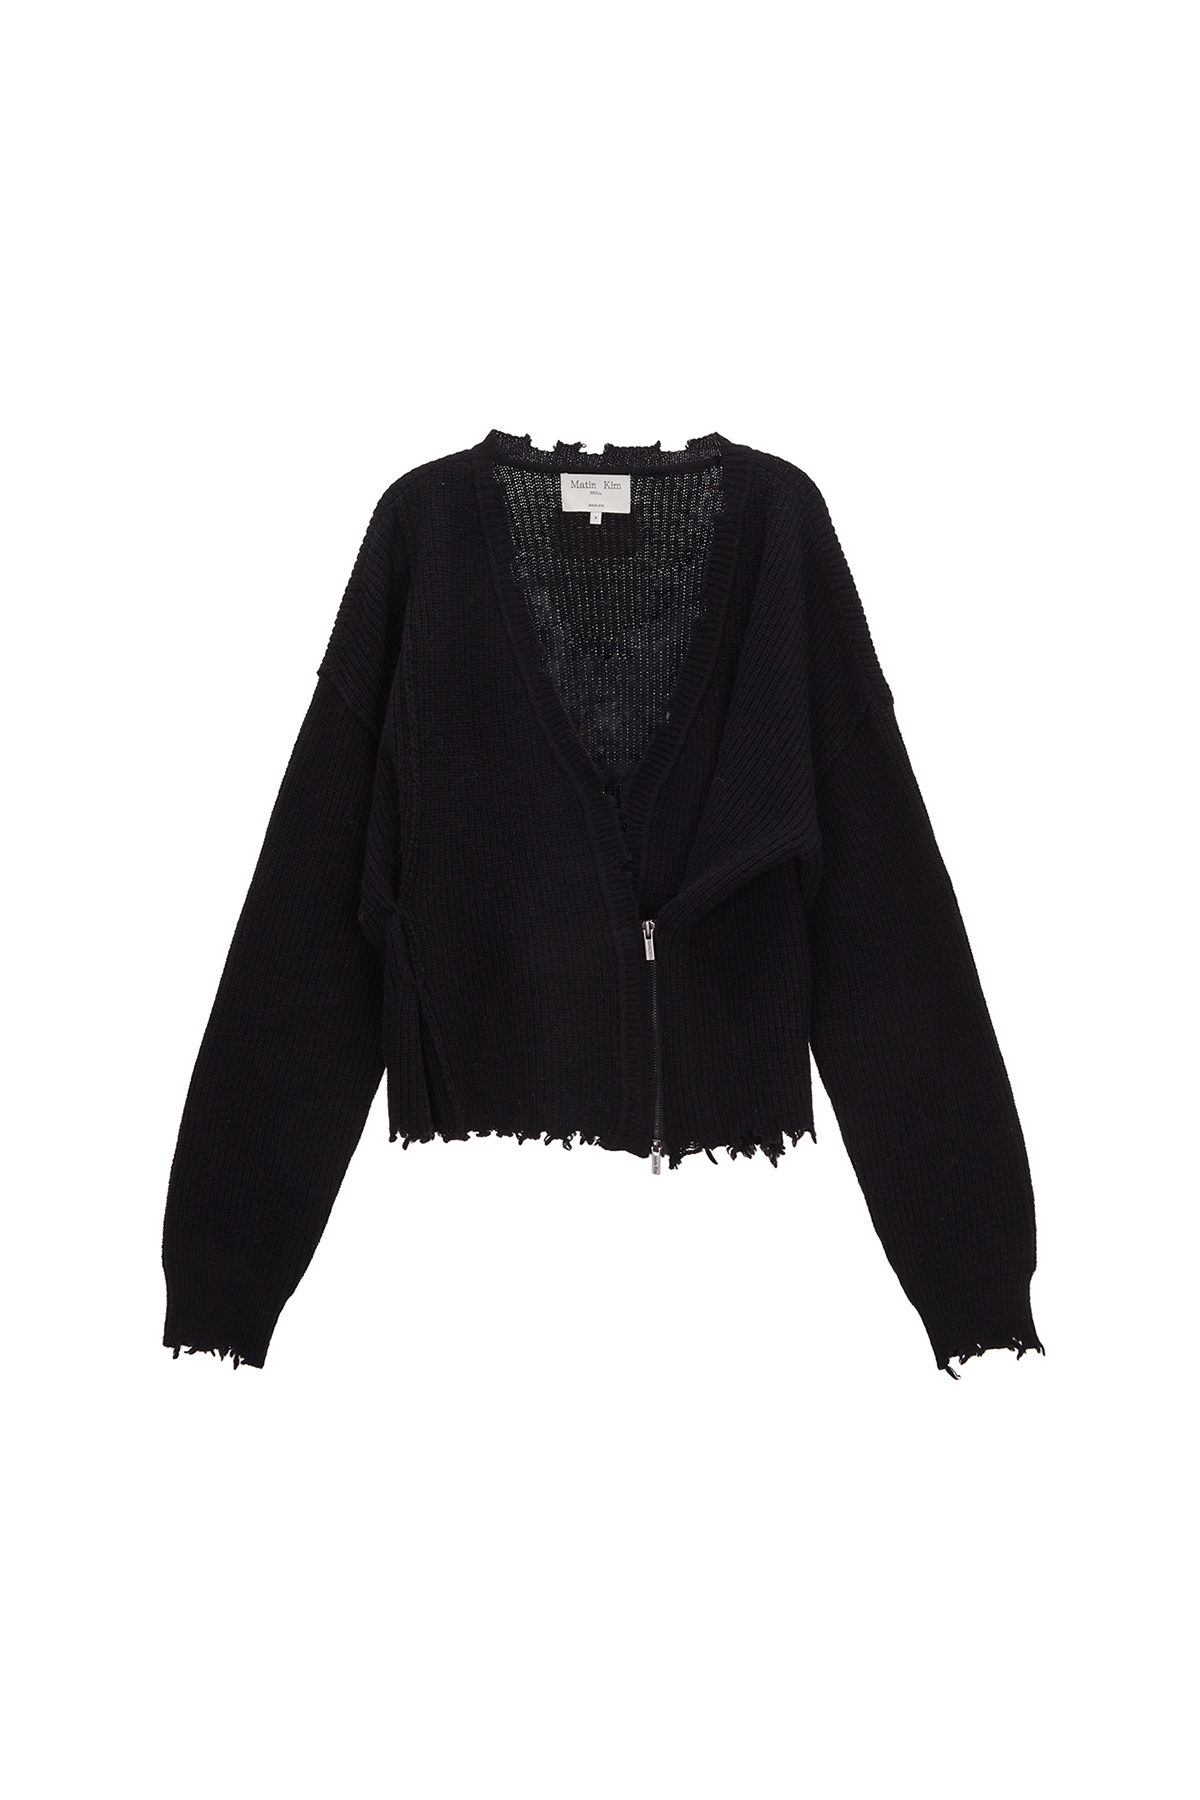 PINCHED TWO WAY KNIT ZIP CARDIGAN IN BLACK